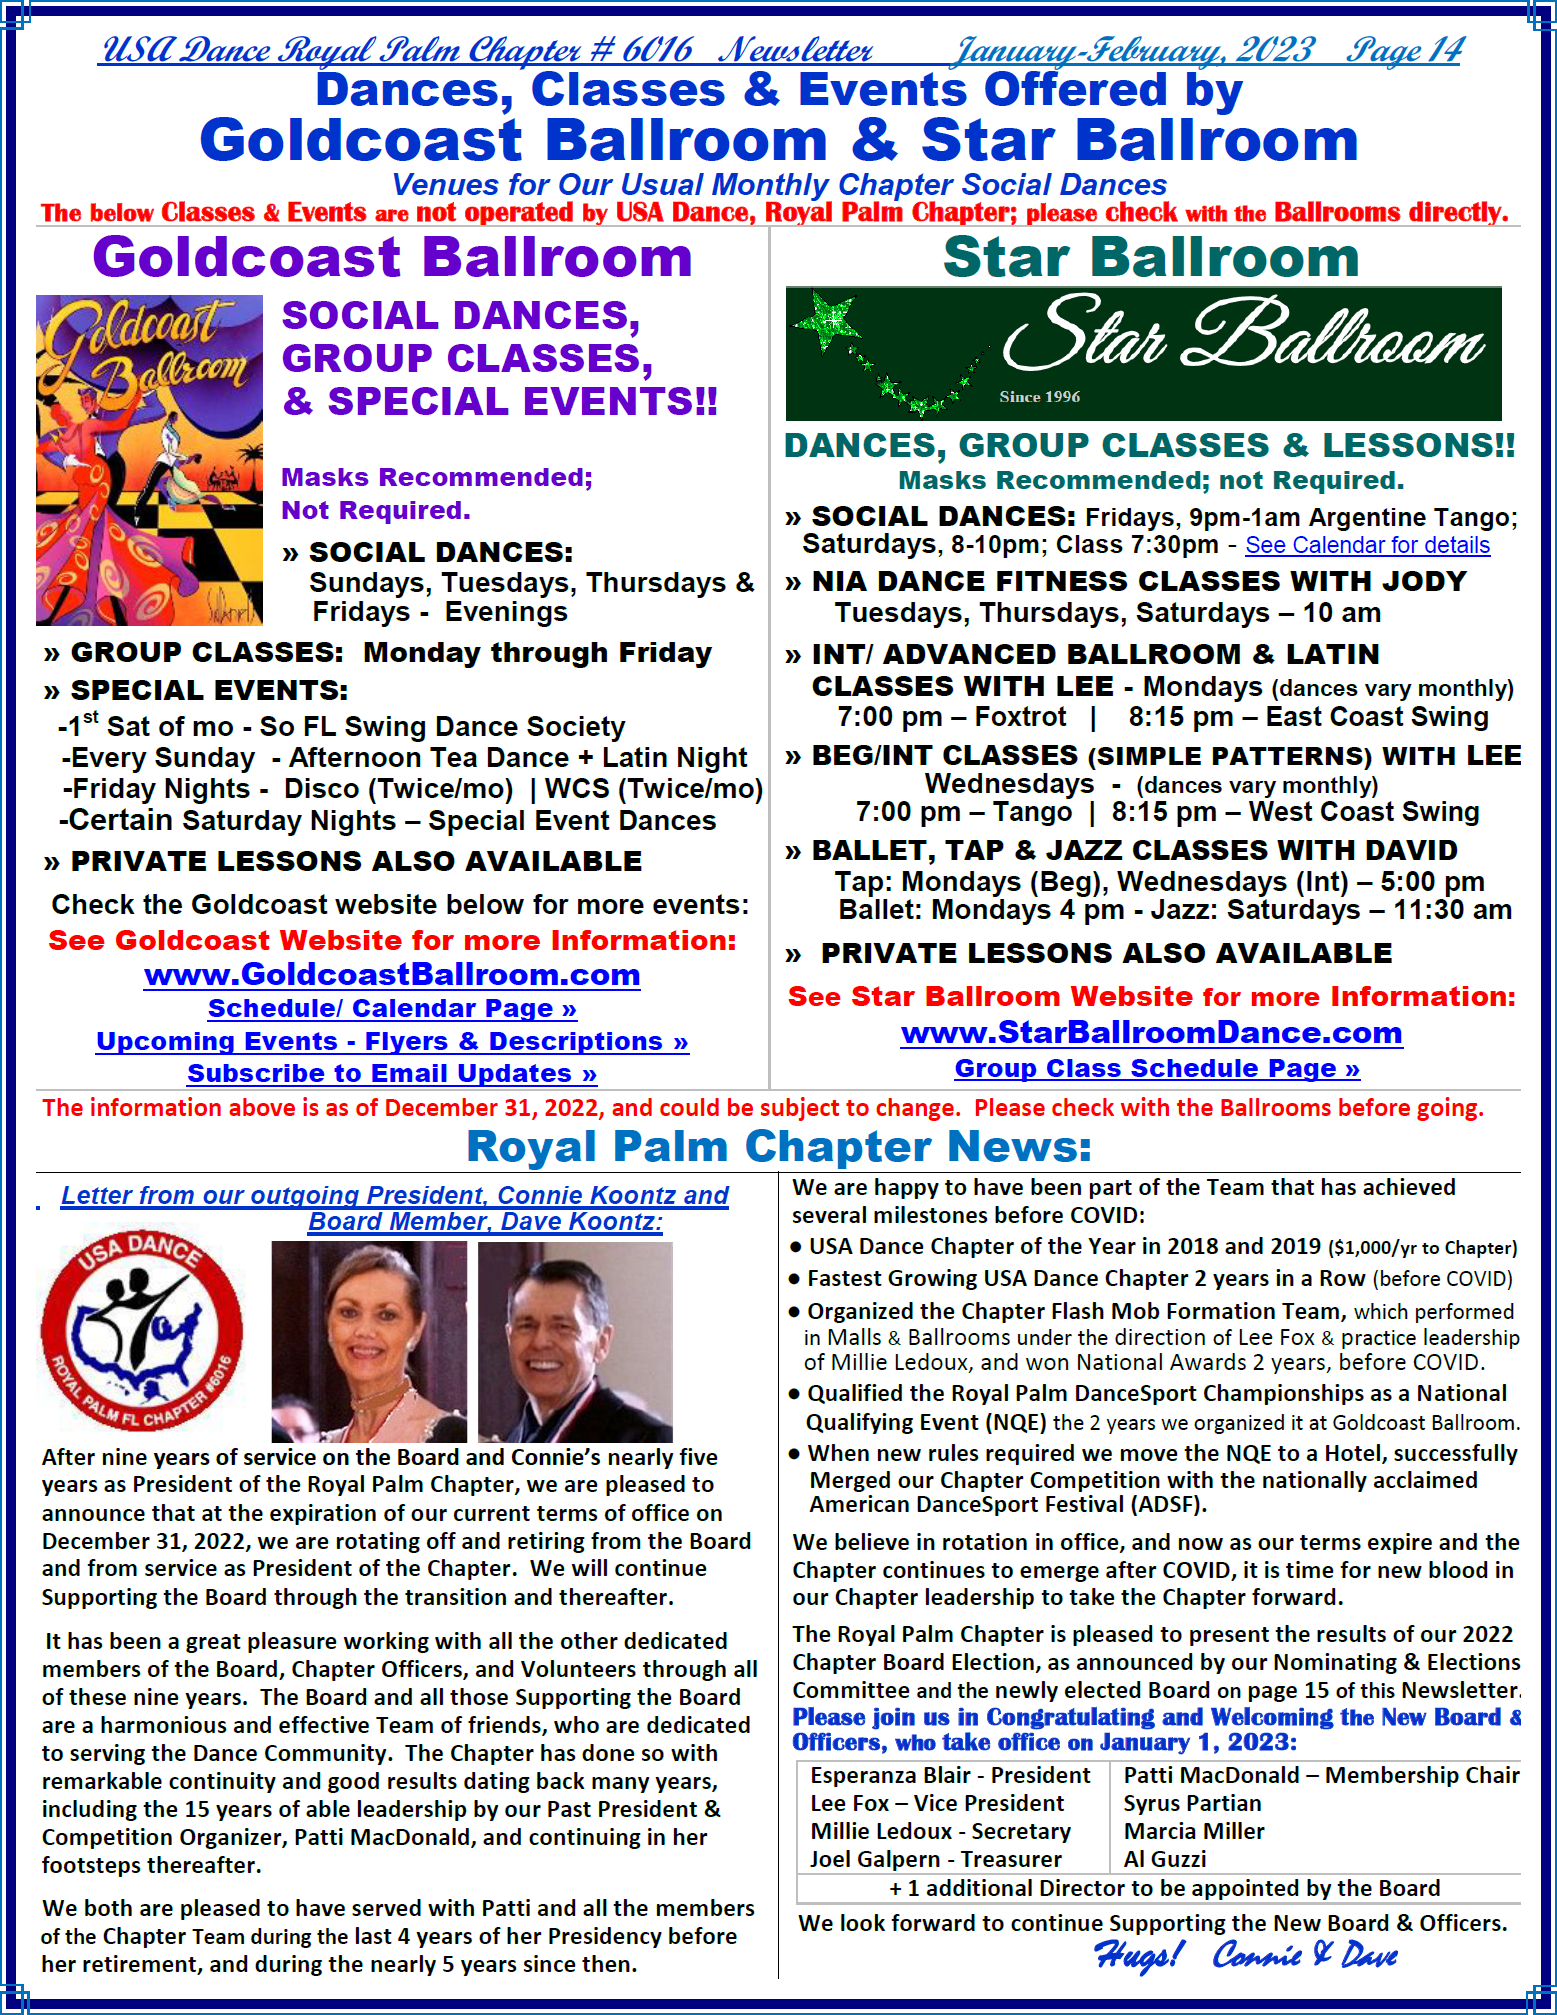 Dancing & Royal Palm Chapter News - page 14 Jan-Feb 2023 Newsletter